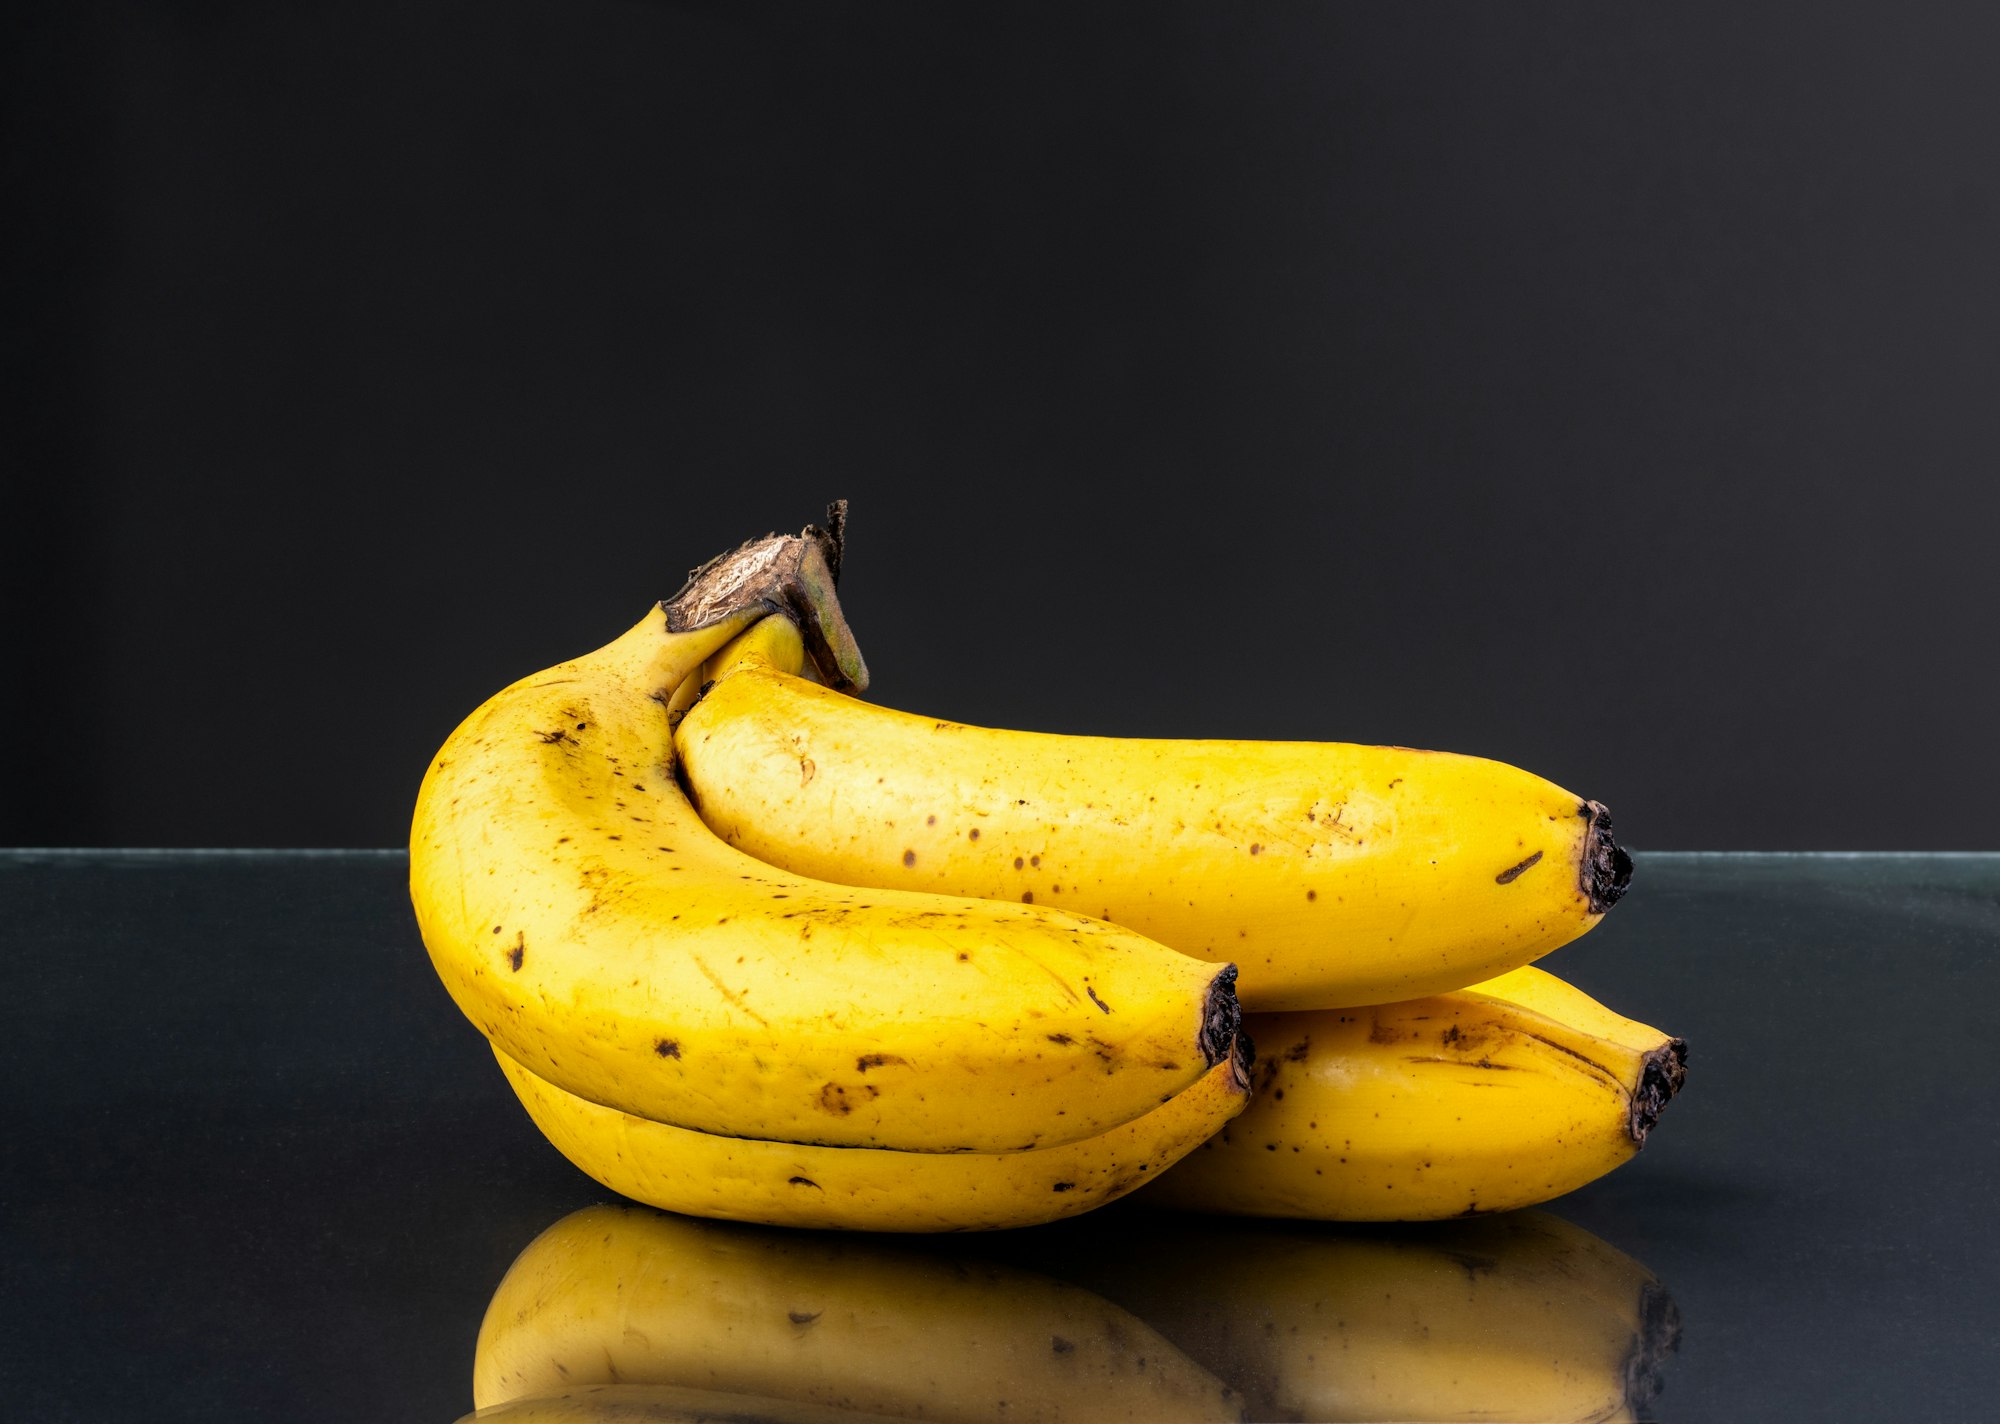 Closeup shot of the texture and color of bananas on dark background